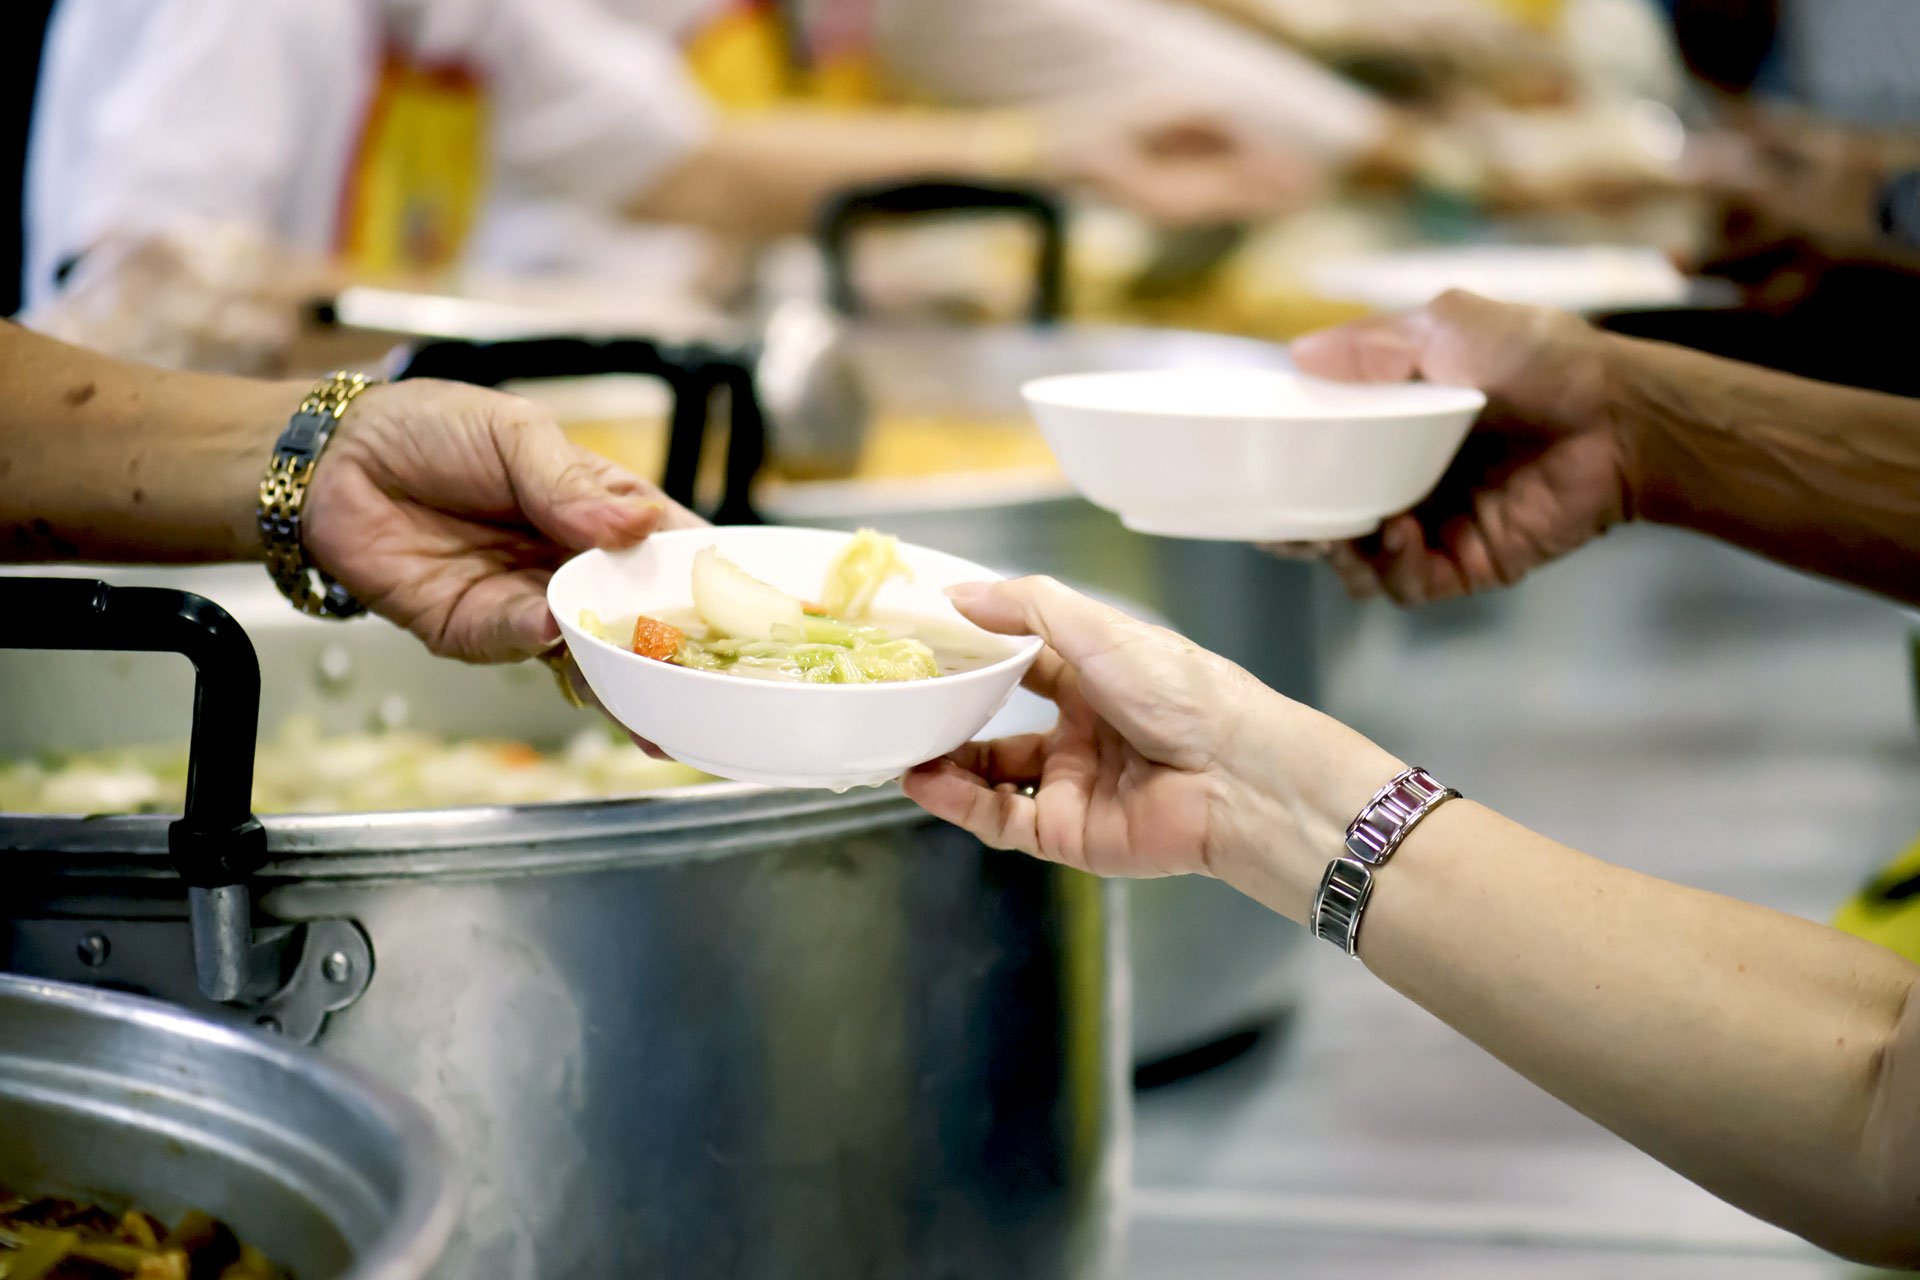 Feeding the hungry at a soup kitchen